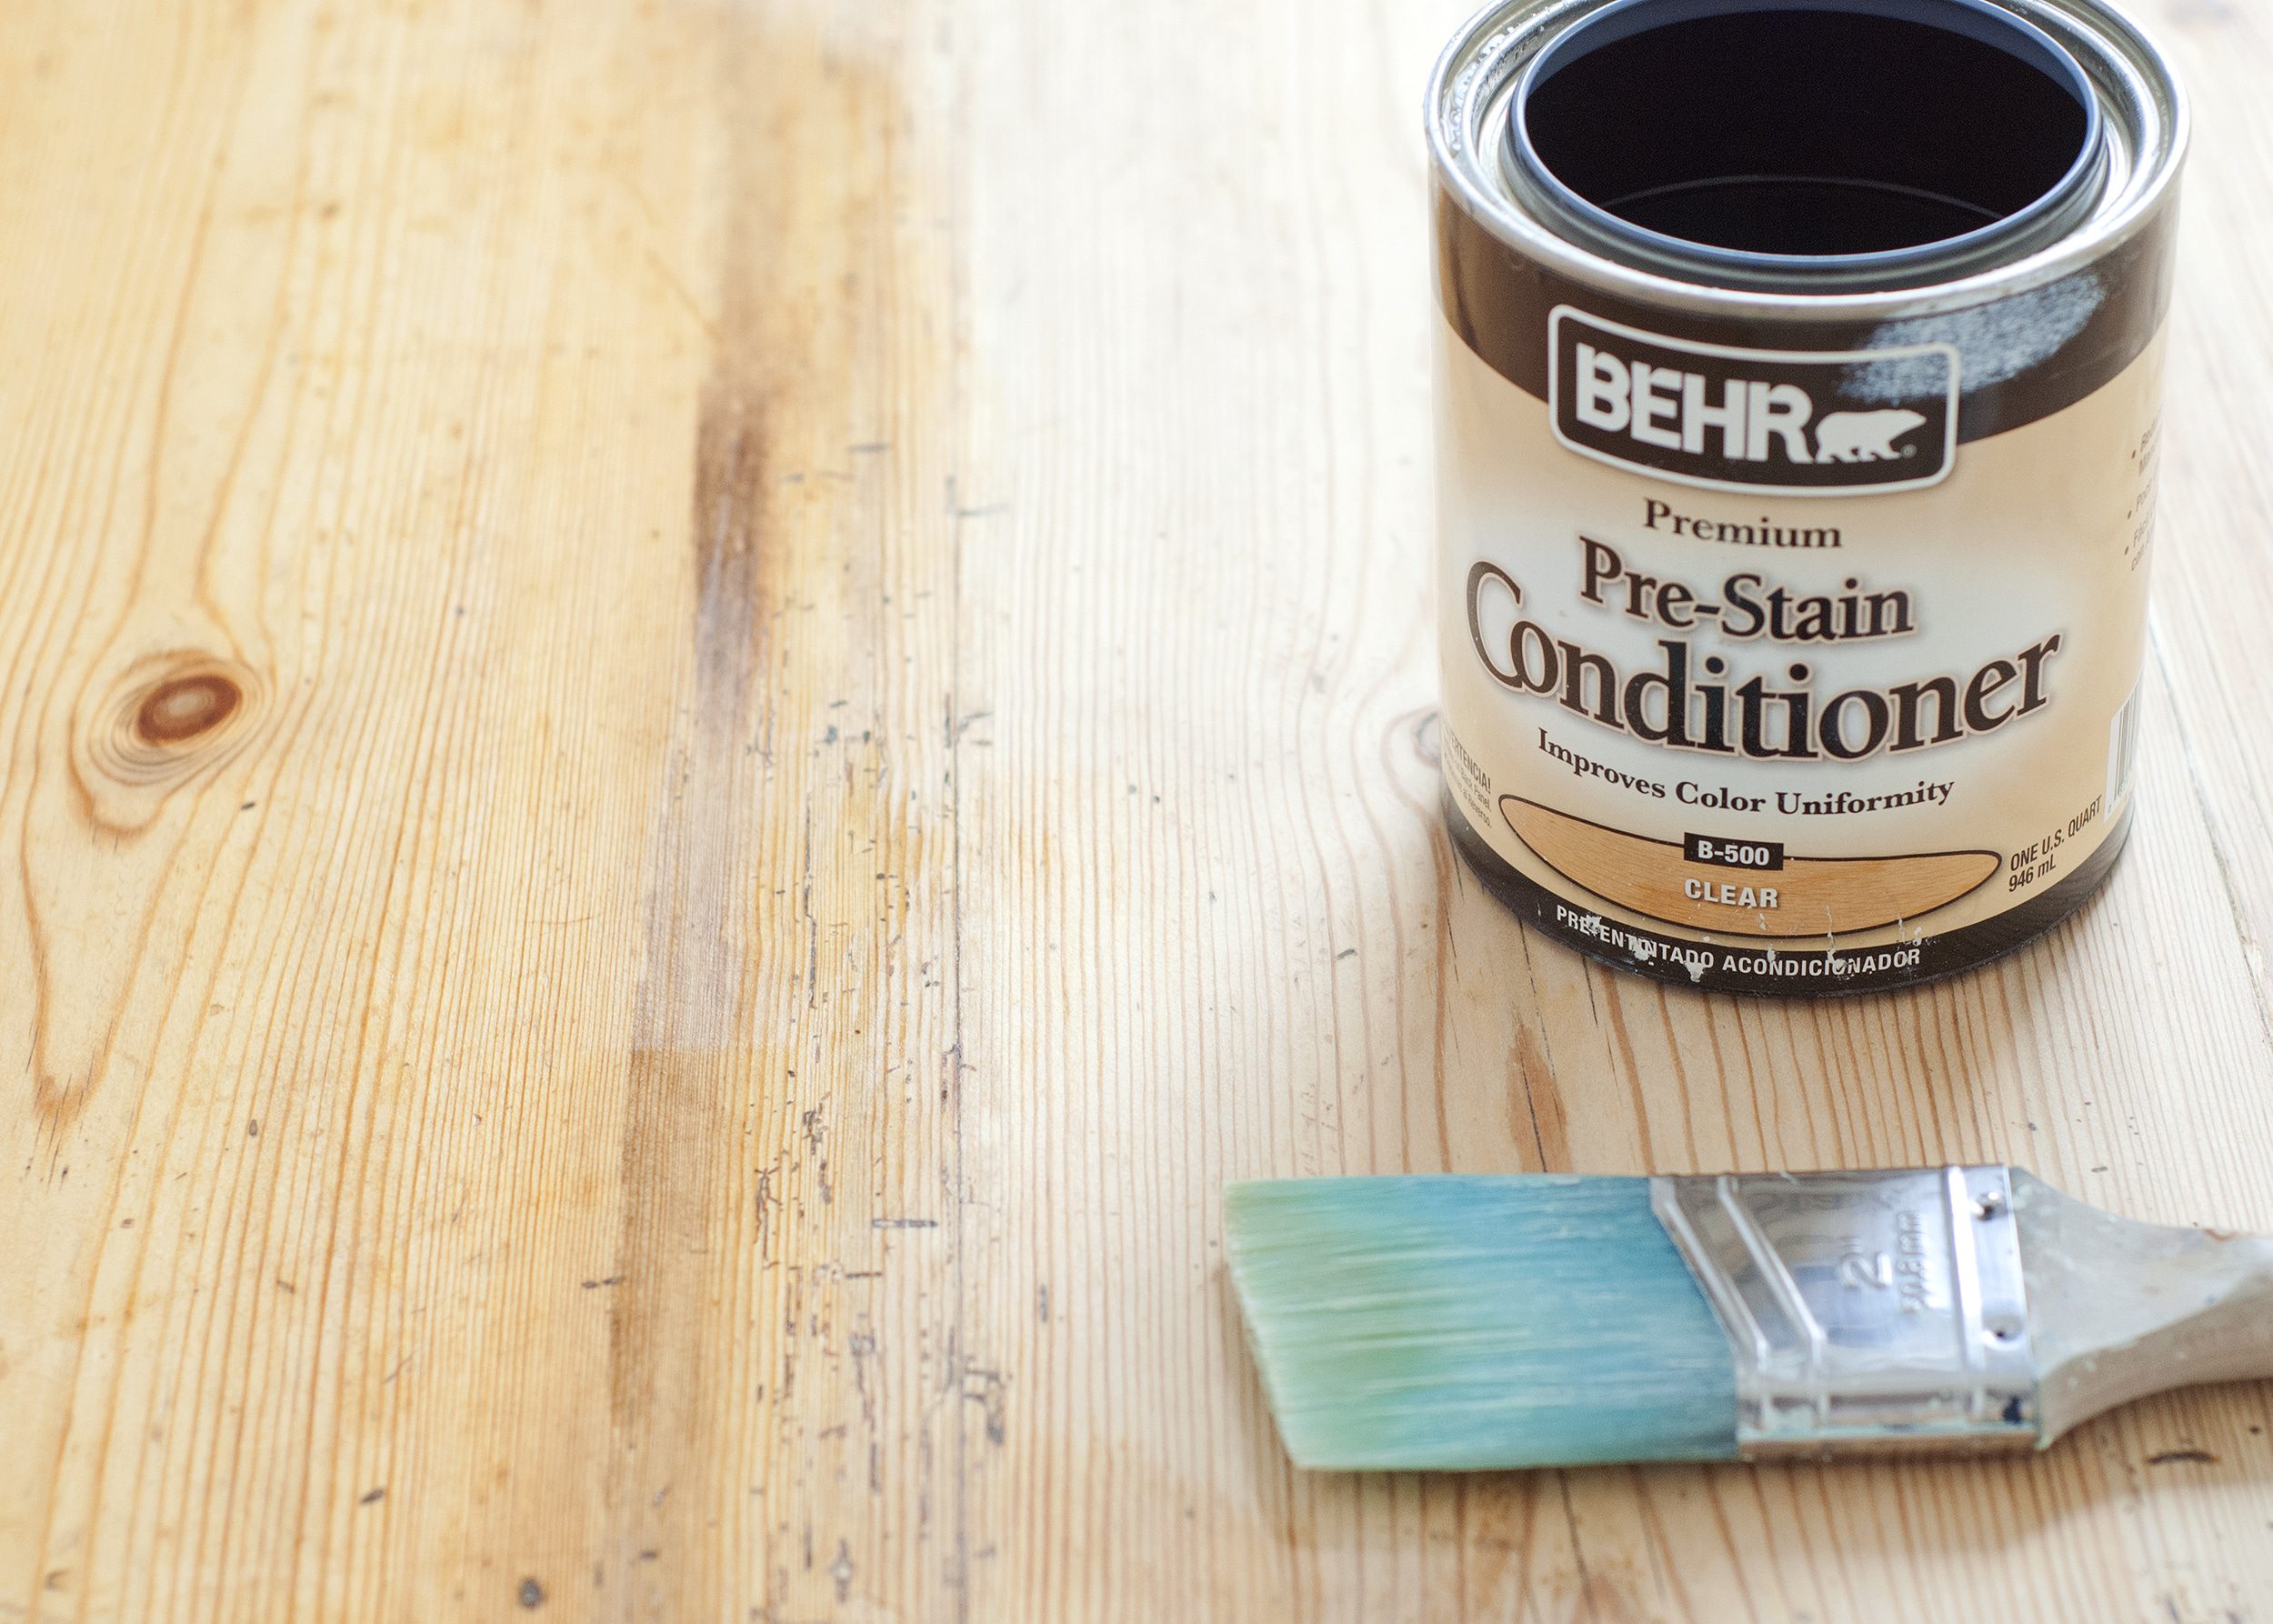 Pre stain conditioner and a high quality brush are necessary to ensure even coverage, especially with vintage wood // via Yellow Brick Home